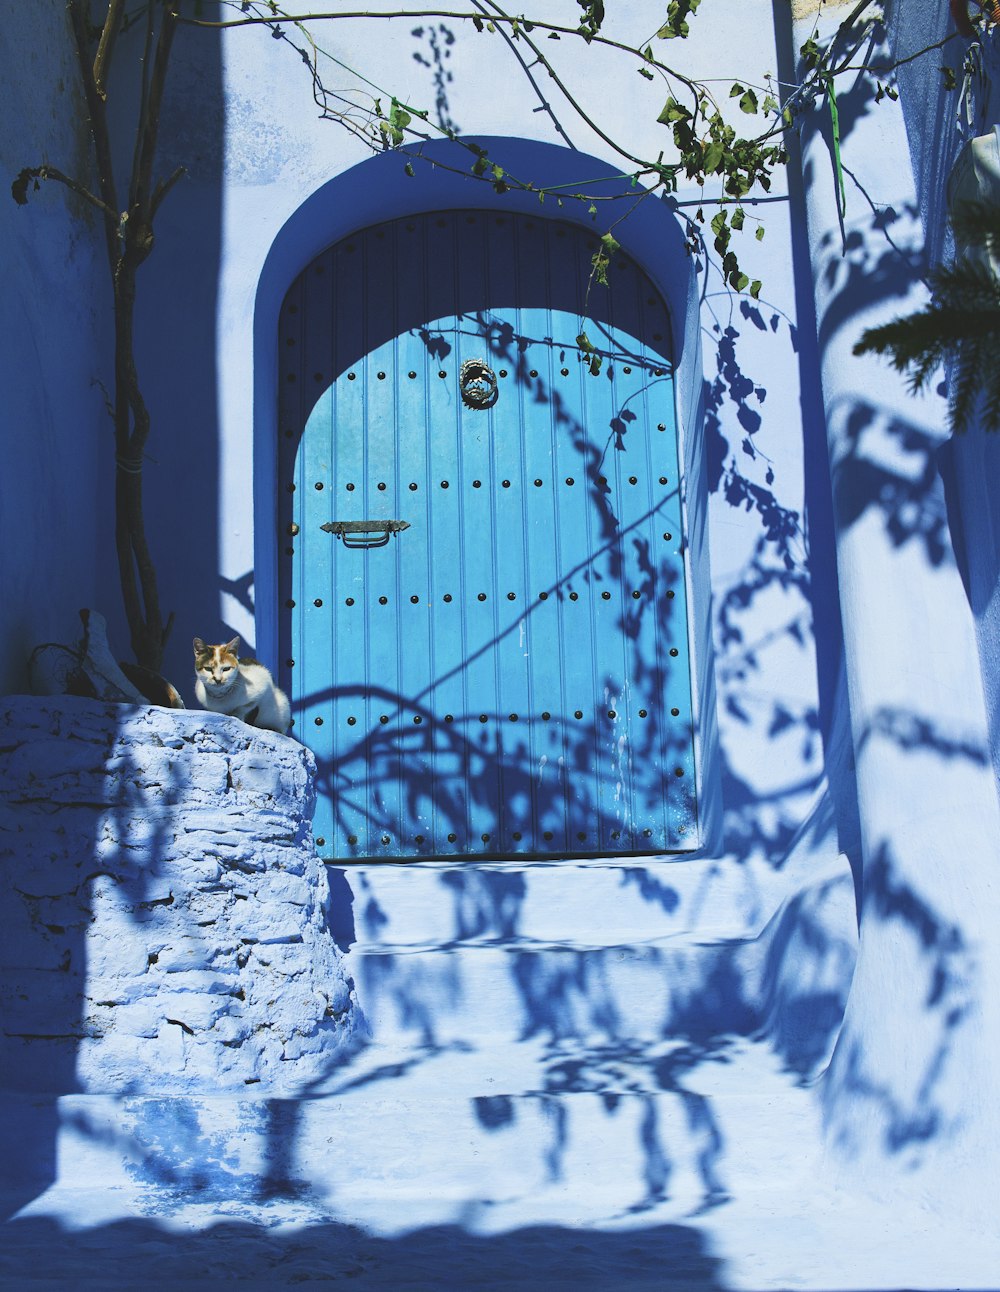 a cat sitting in front of a blue door